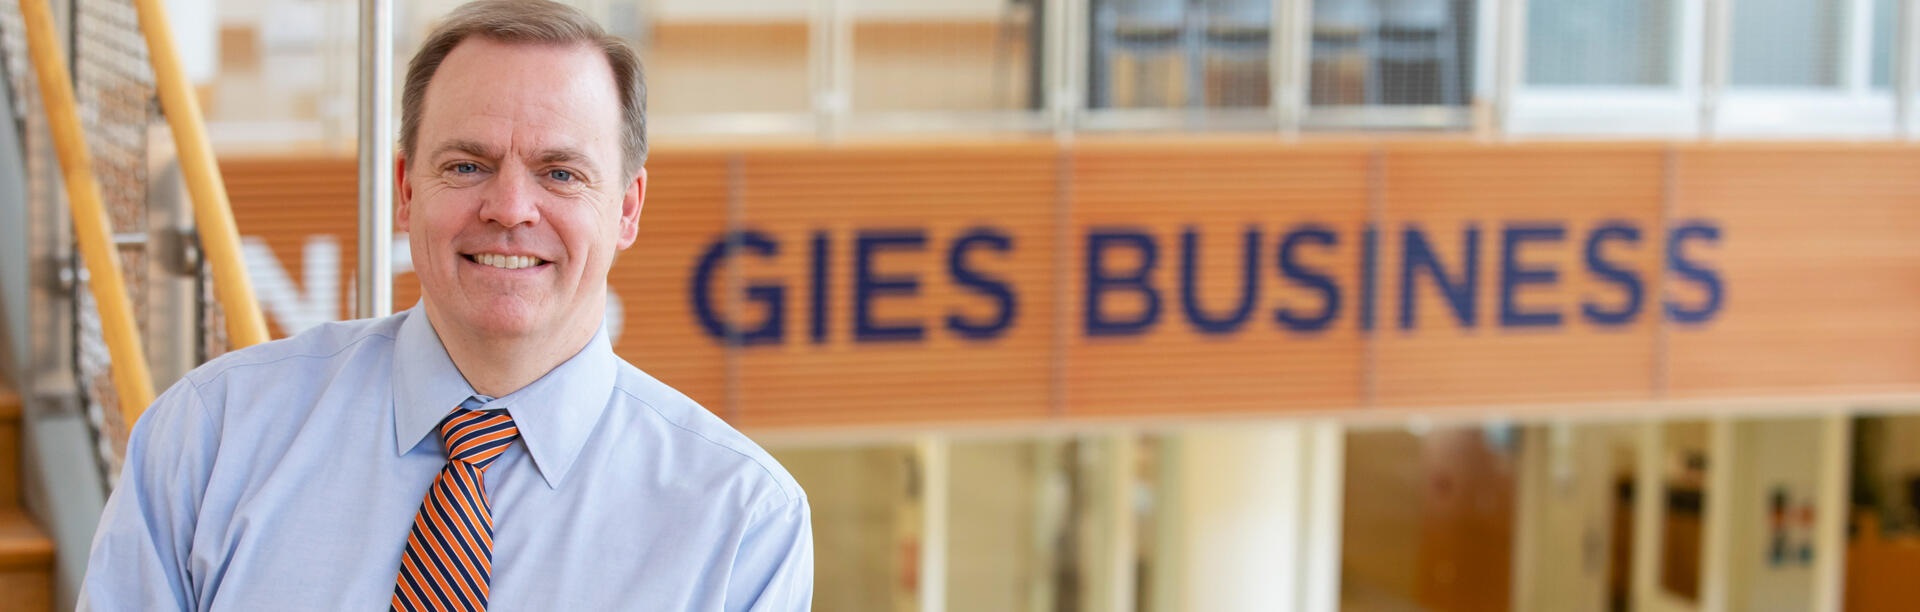 Master of Accounting Science at Gies Business